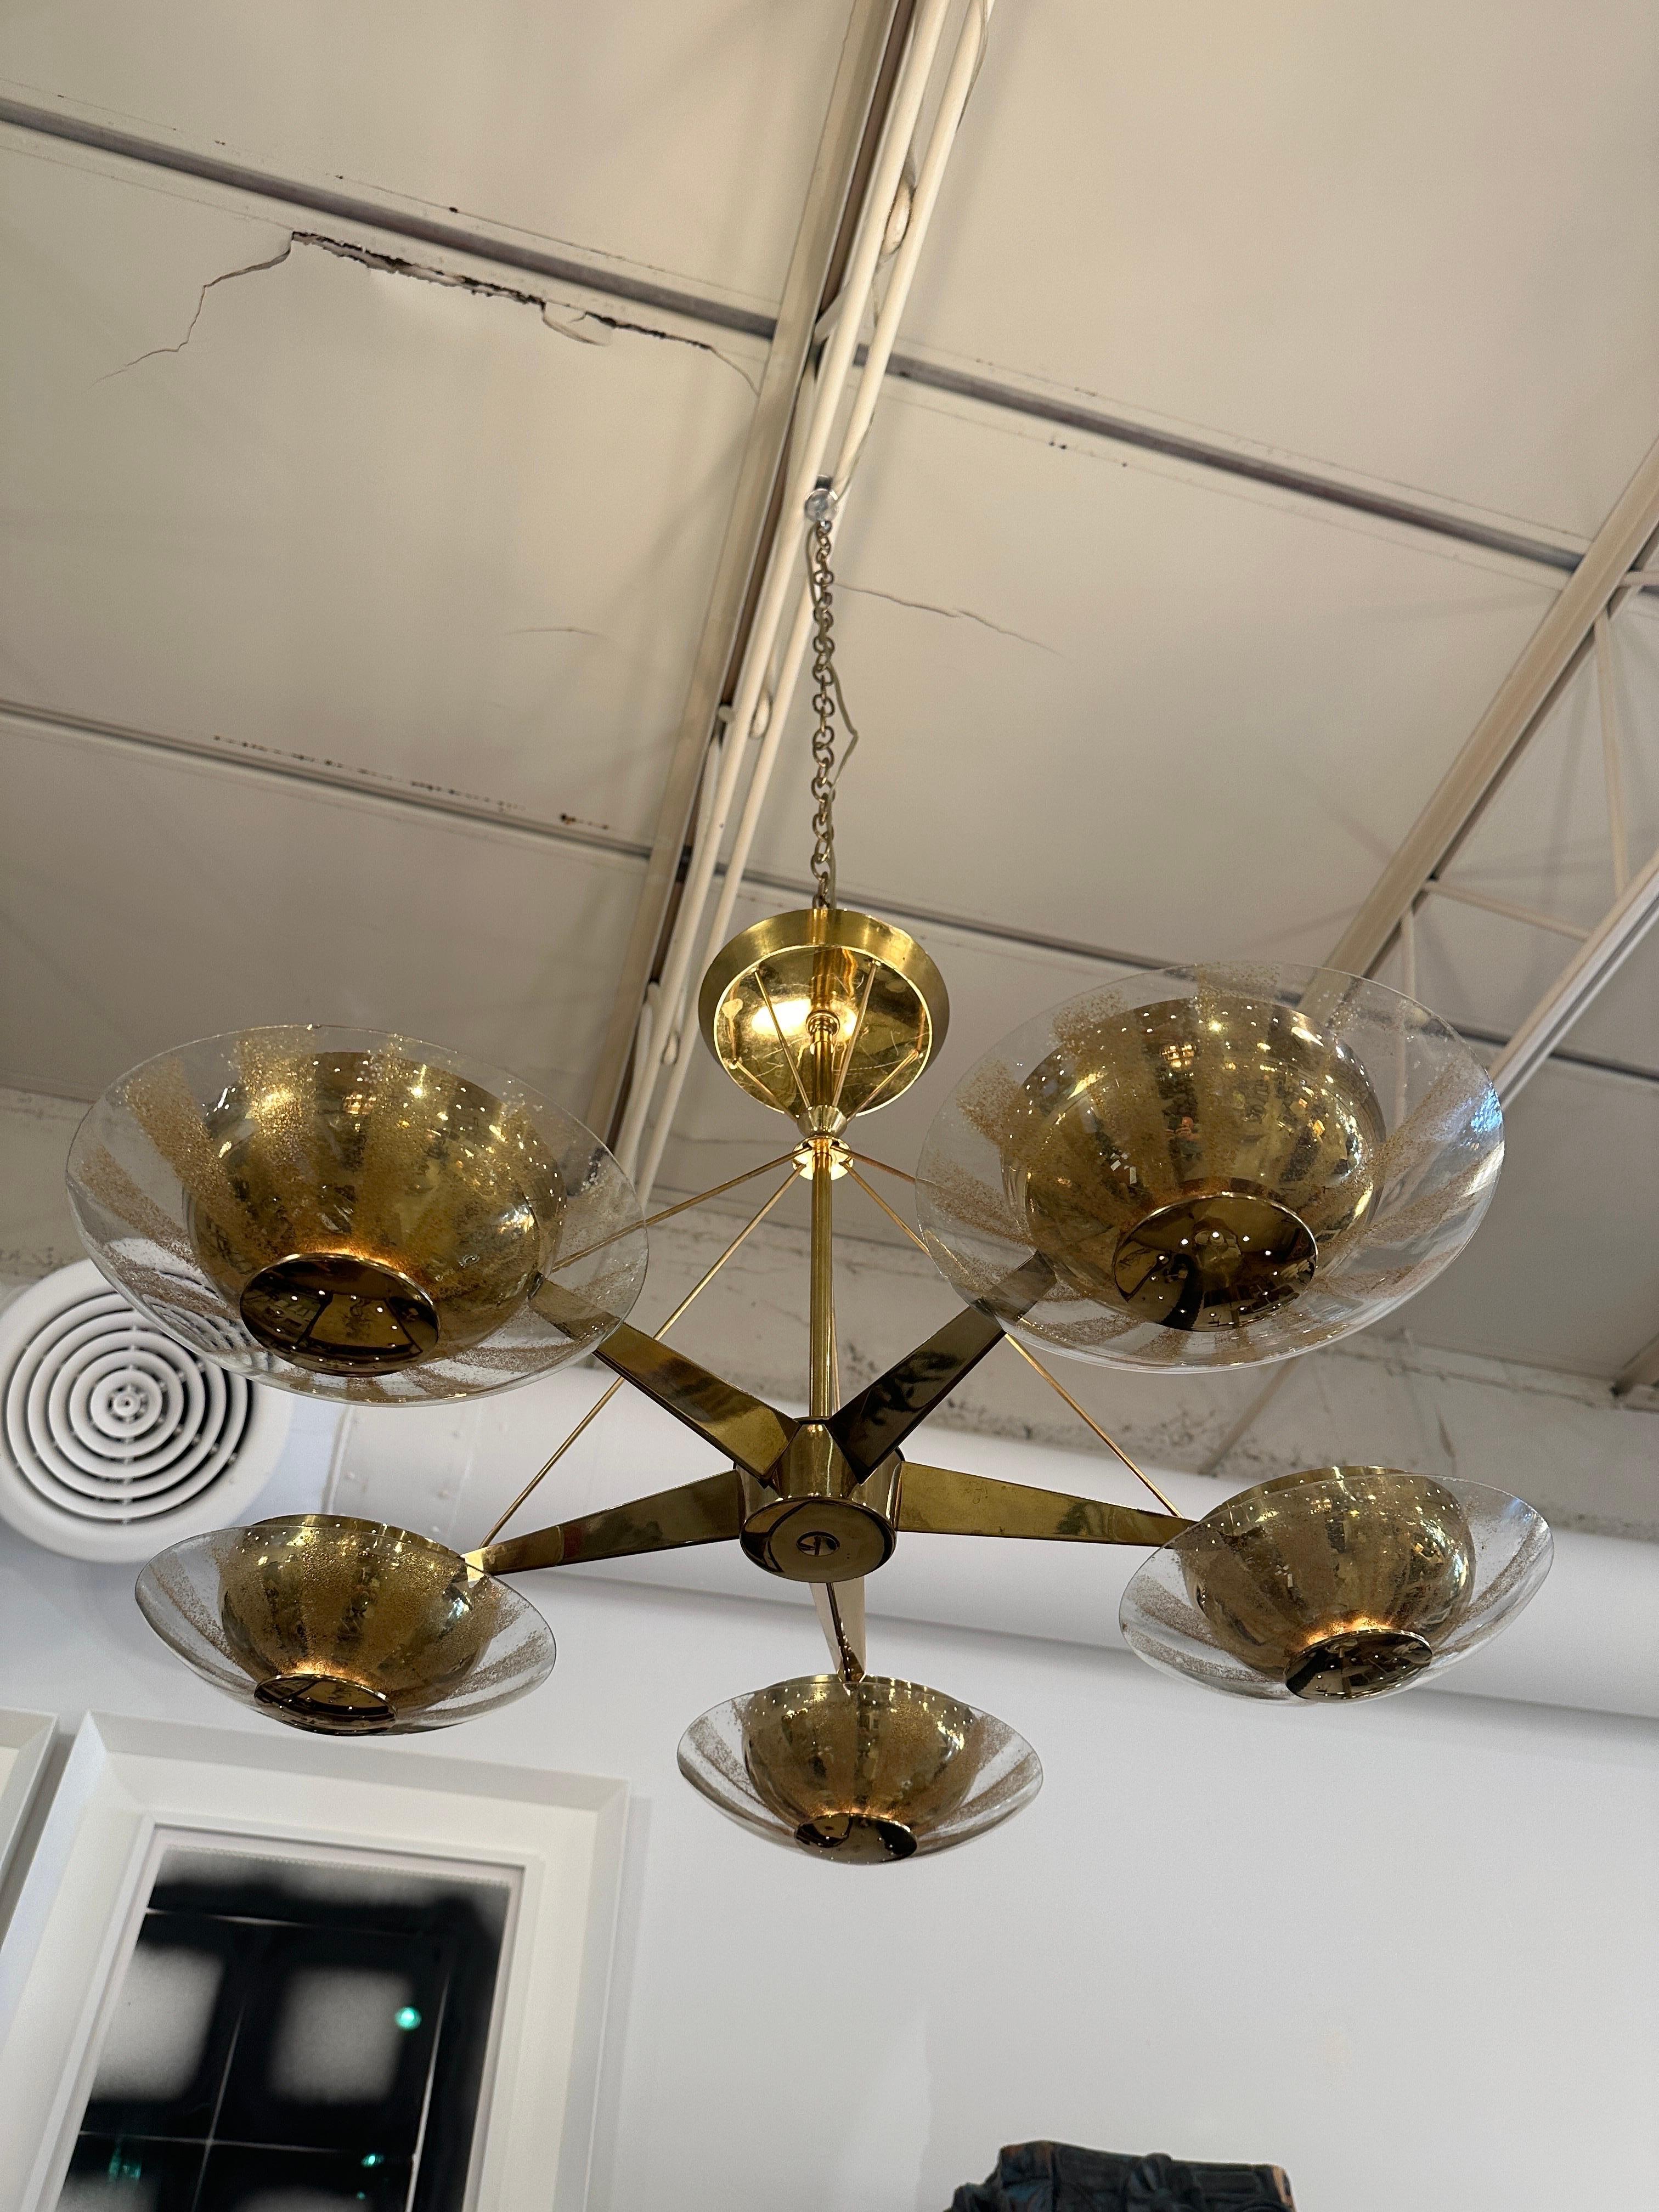 Original vintage LIGHTOLIER Five light - Five arm chandelier with perforated brass diffusers and gold frosted glass shades.  Futuristic brass rods extending from center to meet canopy.  Lightolier paper label on canopy.  Sourced from the Francis J.